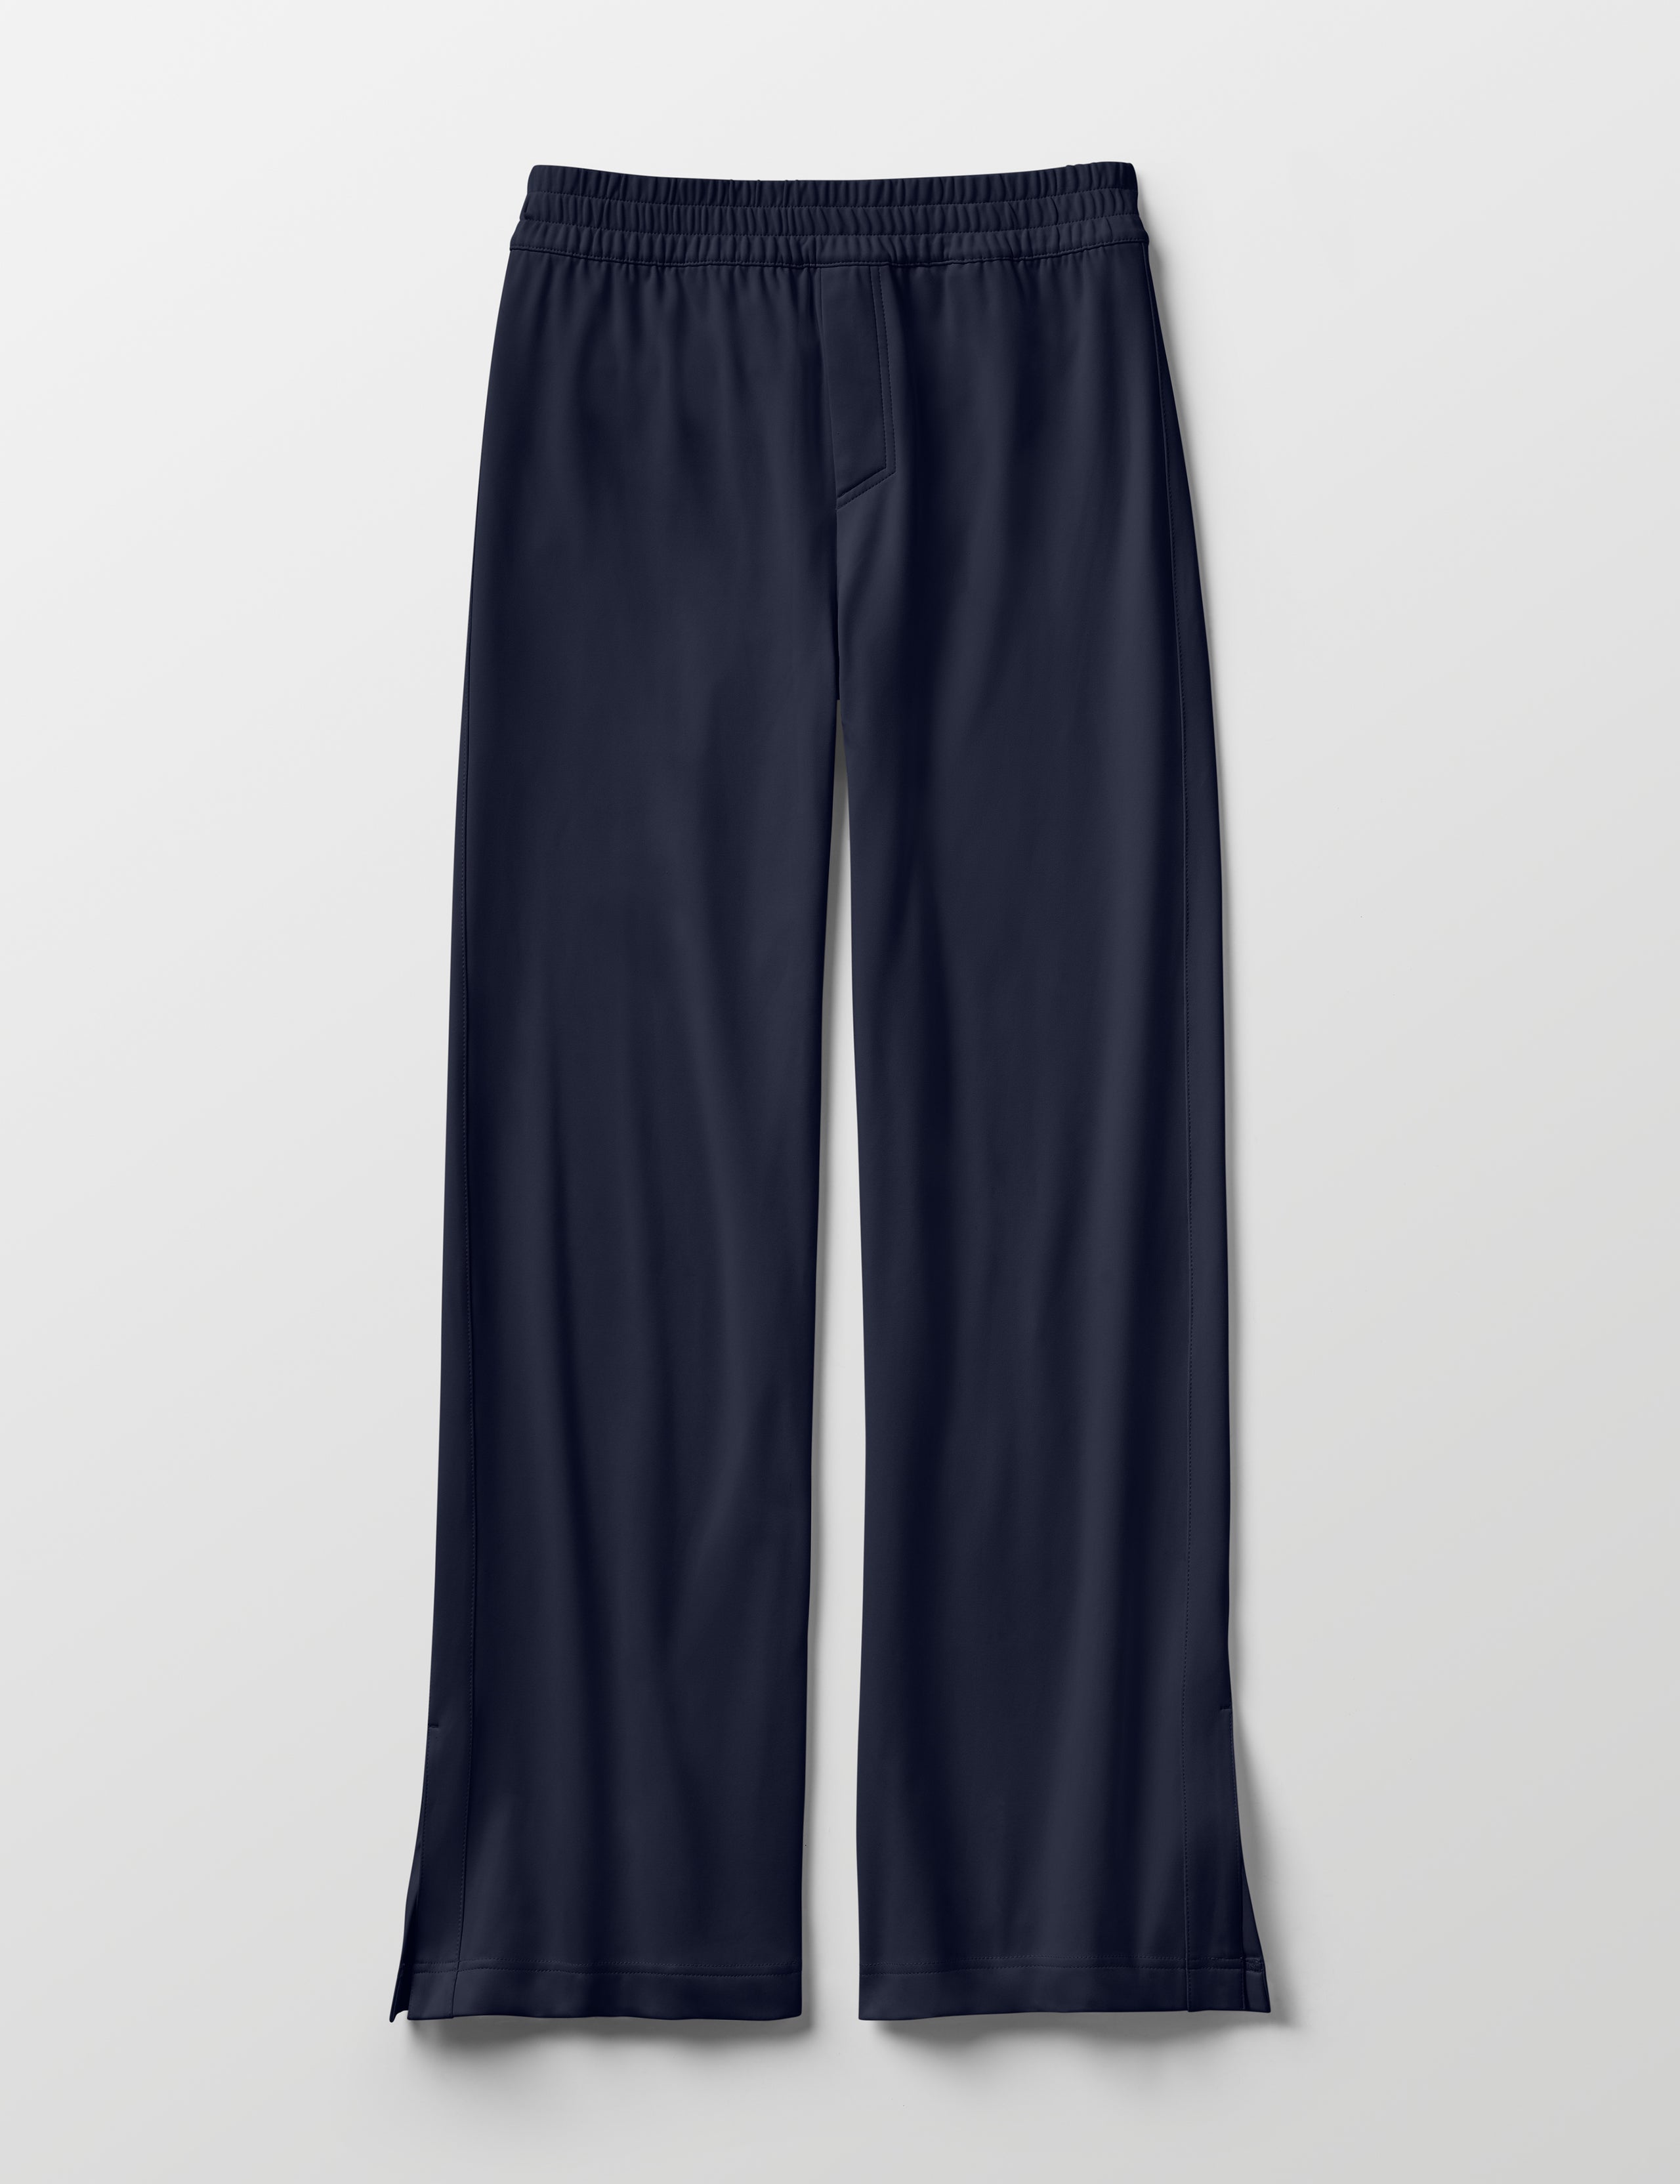 Women's blue travel pant from AETHER Apparel